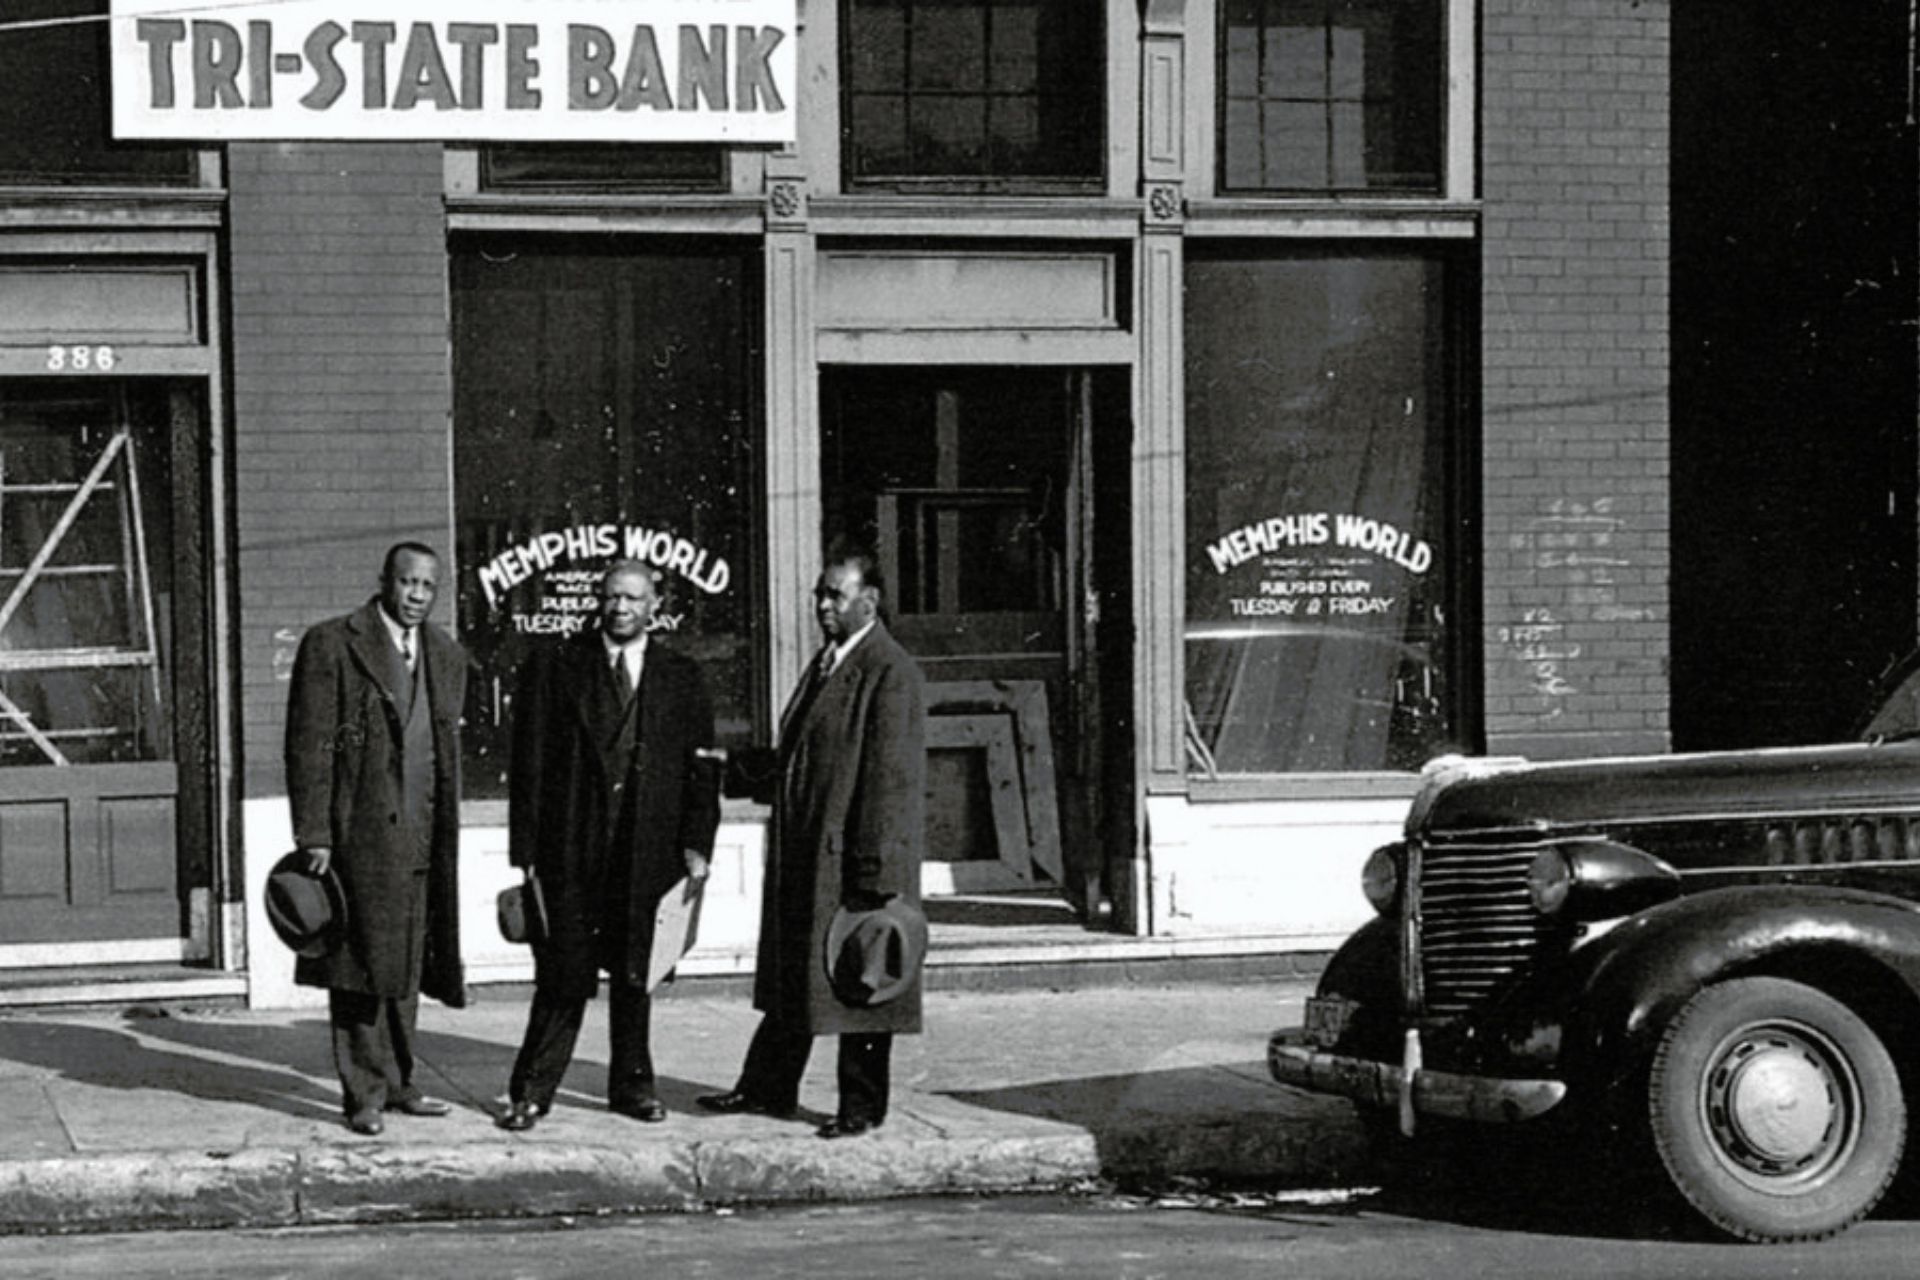 1940s photo of Tri-State Bank